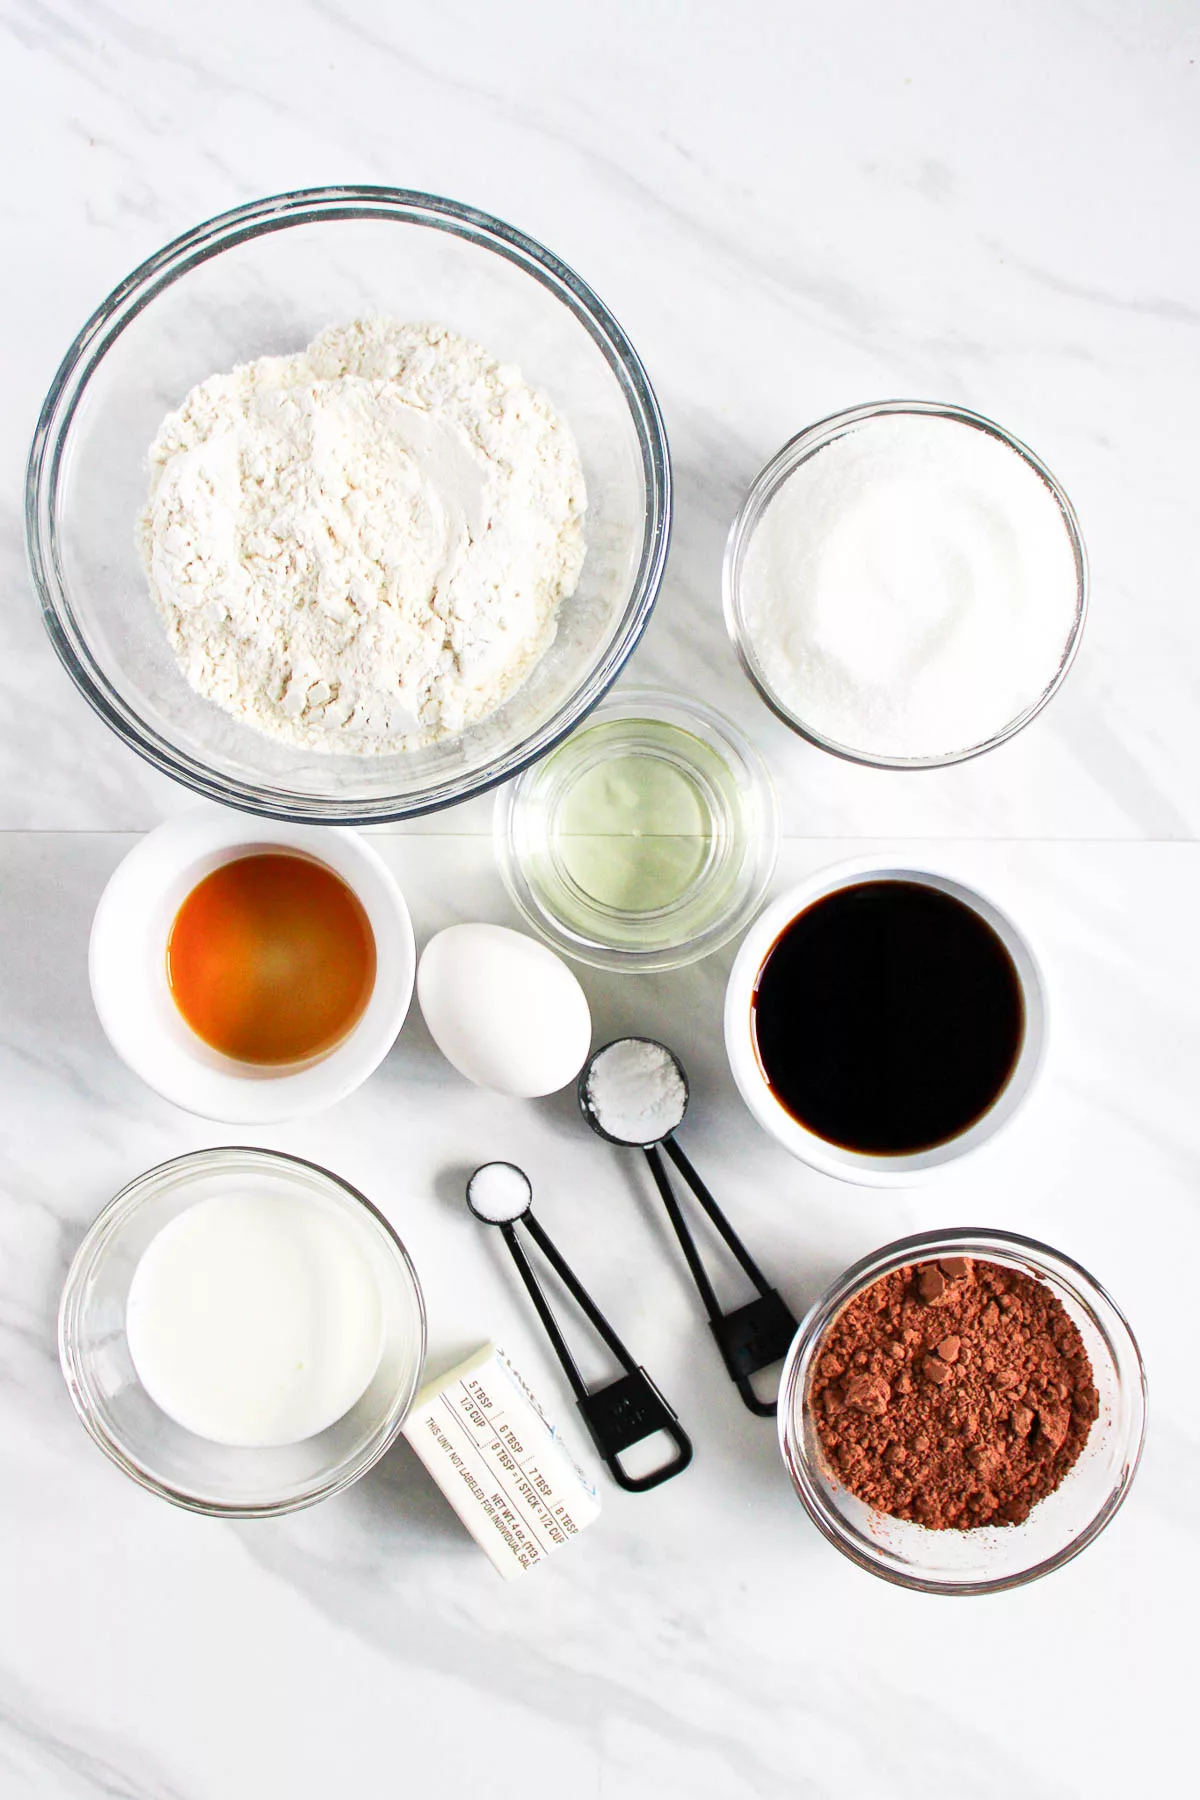 The ingredients for homemade chocolate cupcakes 